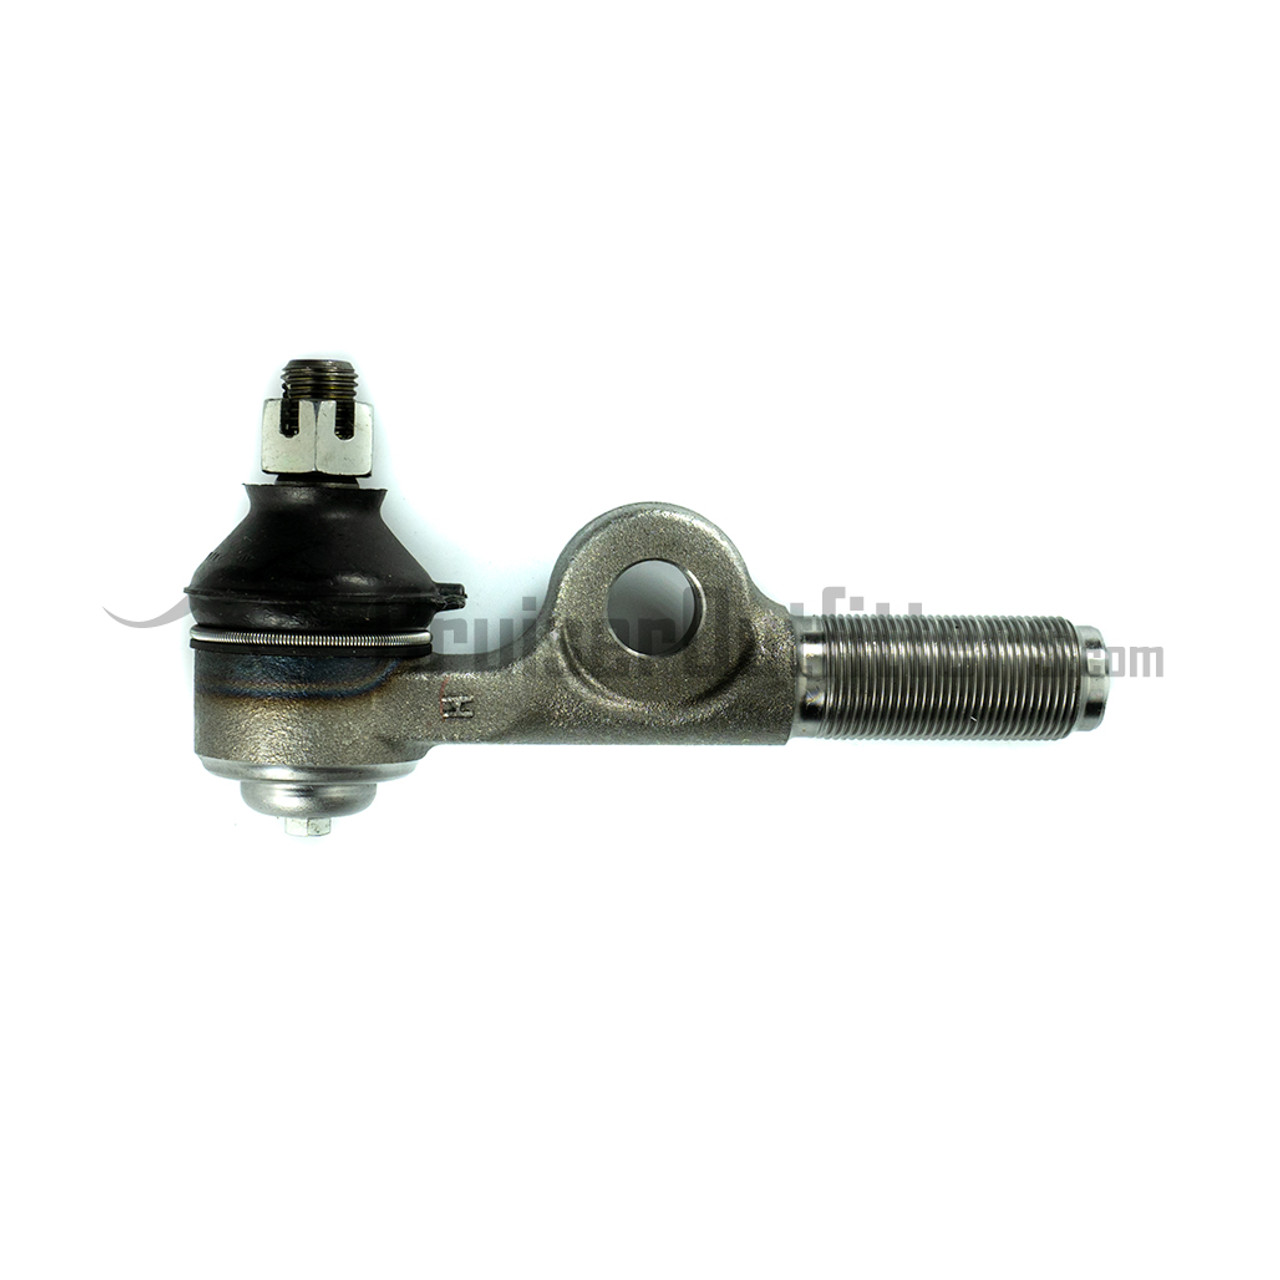 Tie Rod End Kit - Fits 8/80'-90 60/62 Series Left Hand Drive